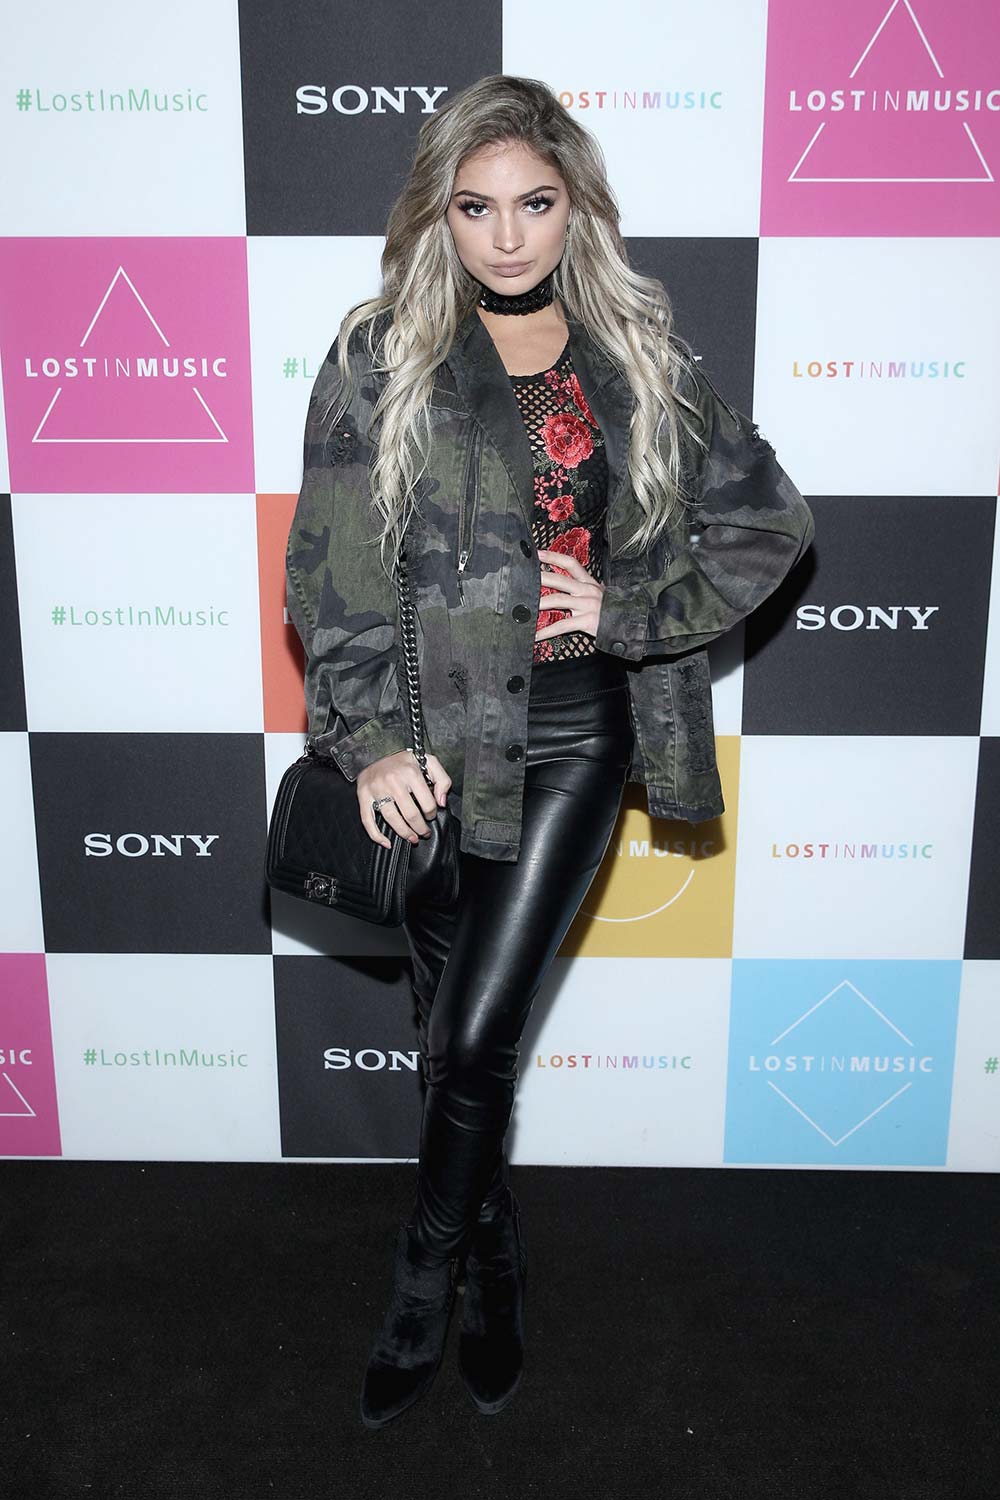 Carrington Durham attends Sony’s Lost in Music Launch